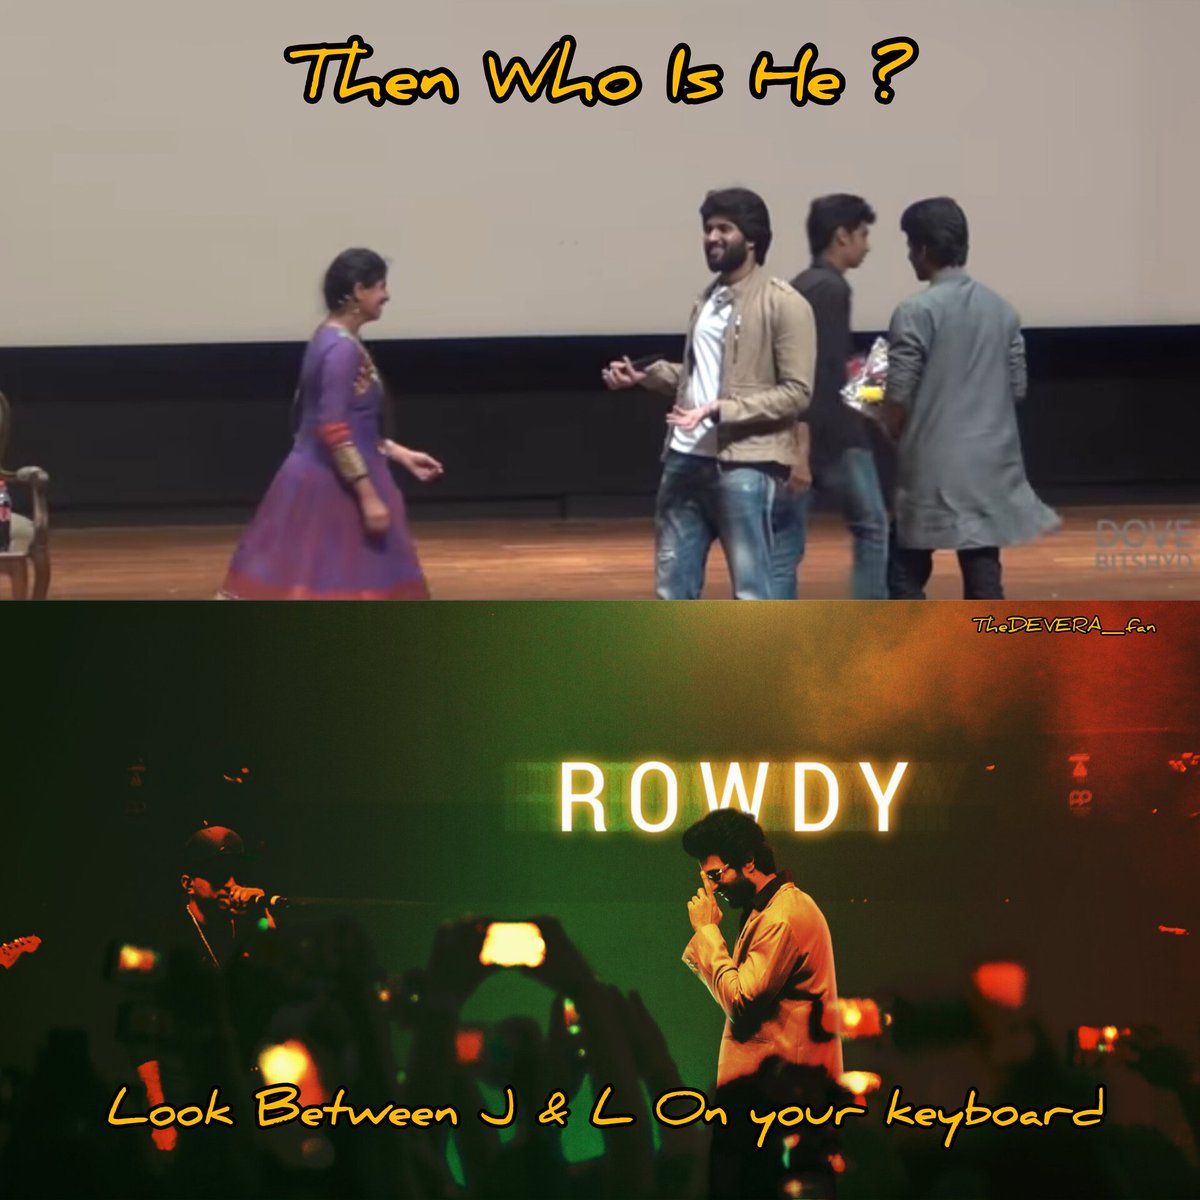 Following THE Trend🔥 Look Btwn J 👑 L✔️ in ur keybrd... 'Setting Goals is the first step in Turning the Invisible in to the Visible.... THE ACHIEVER🫡✔️ #VijayDeverakonda